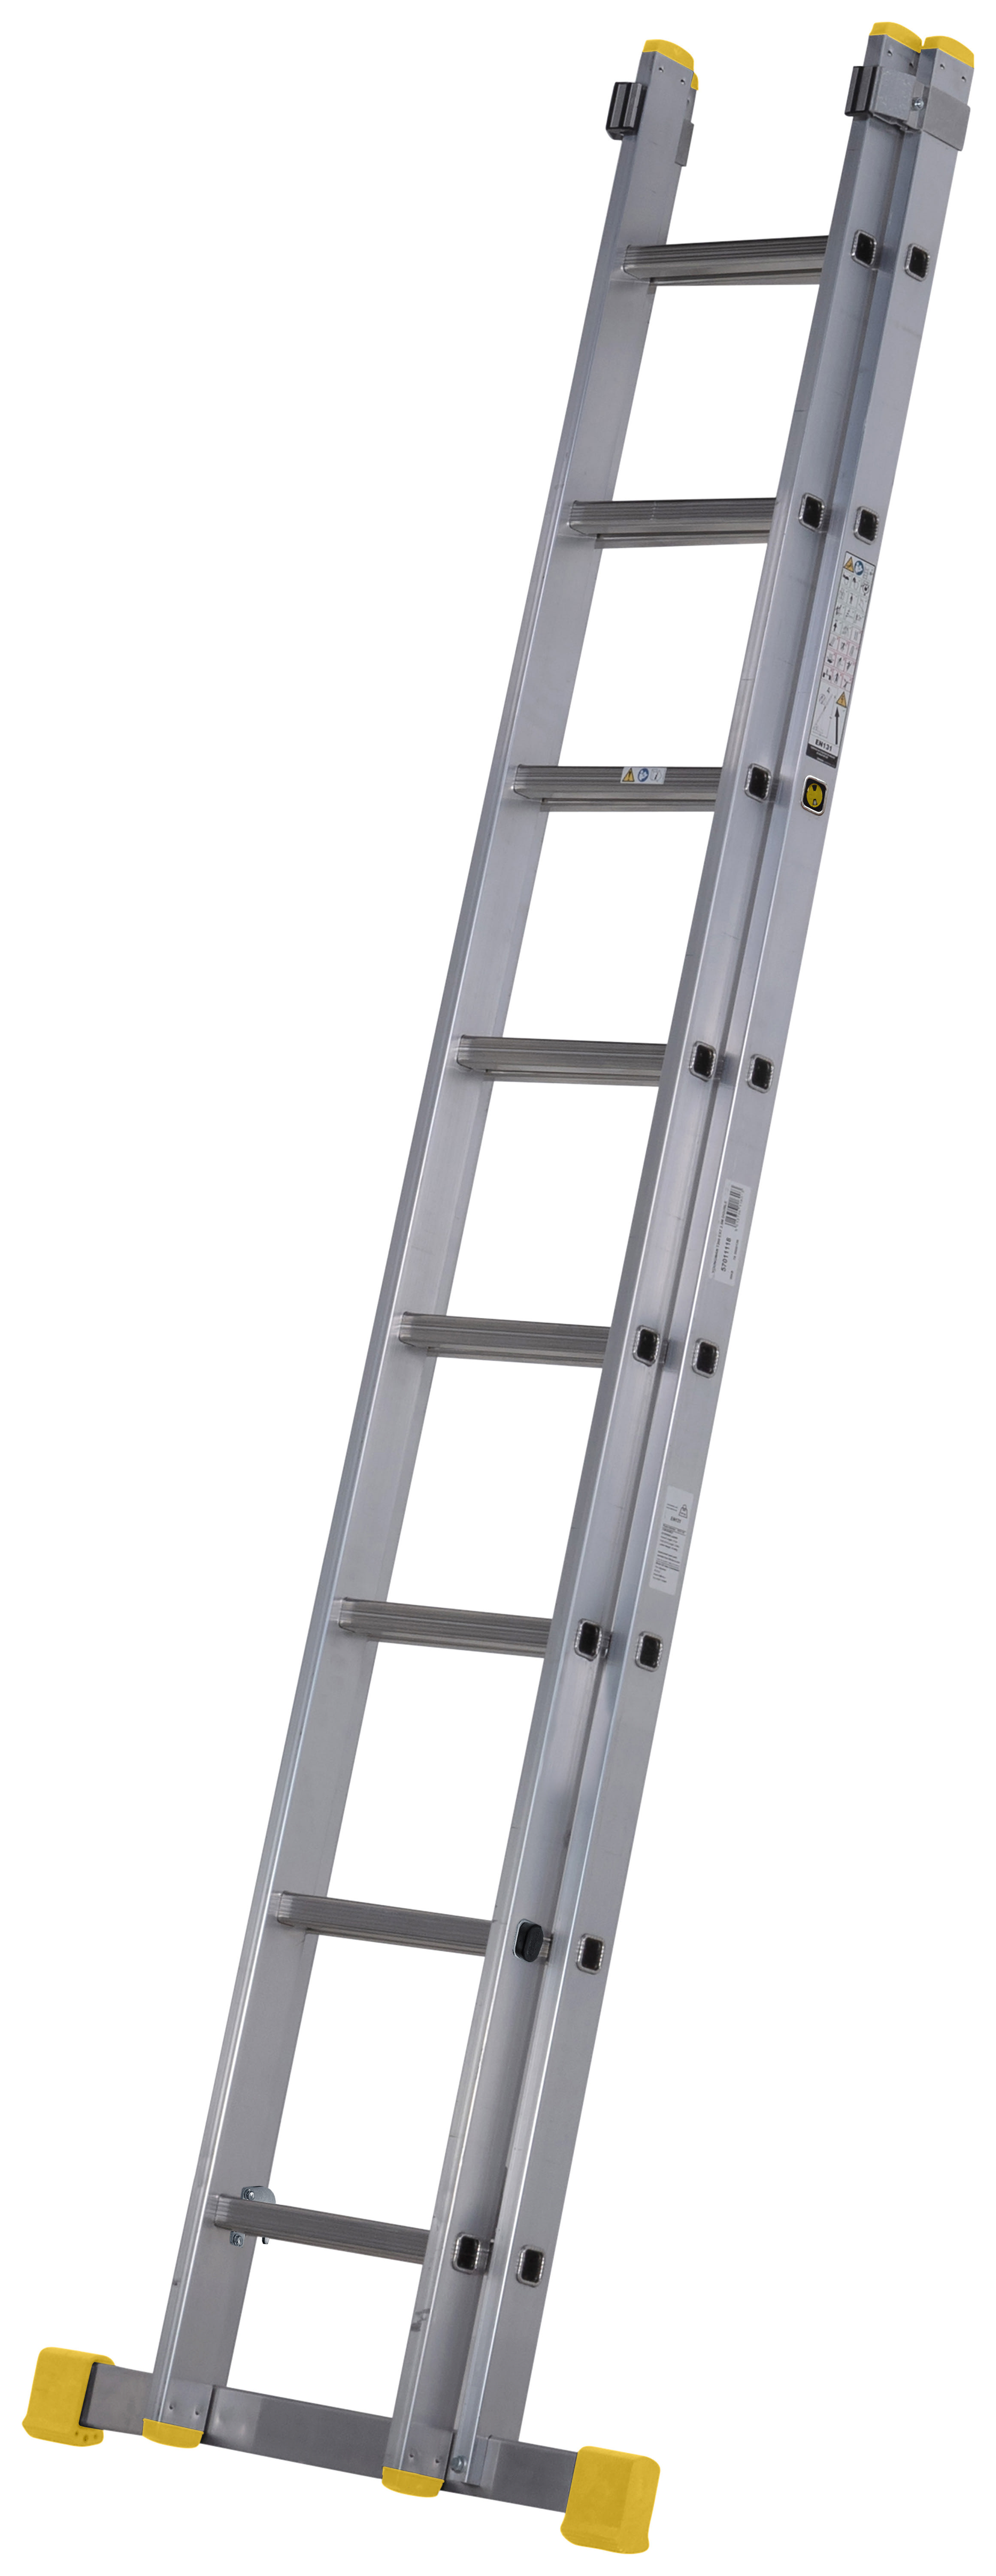 Werner Square Rung Double Extension Ladder - Max